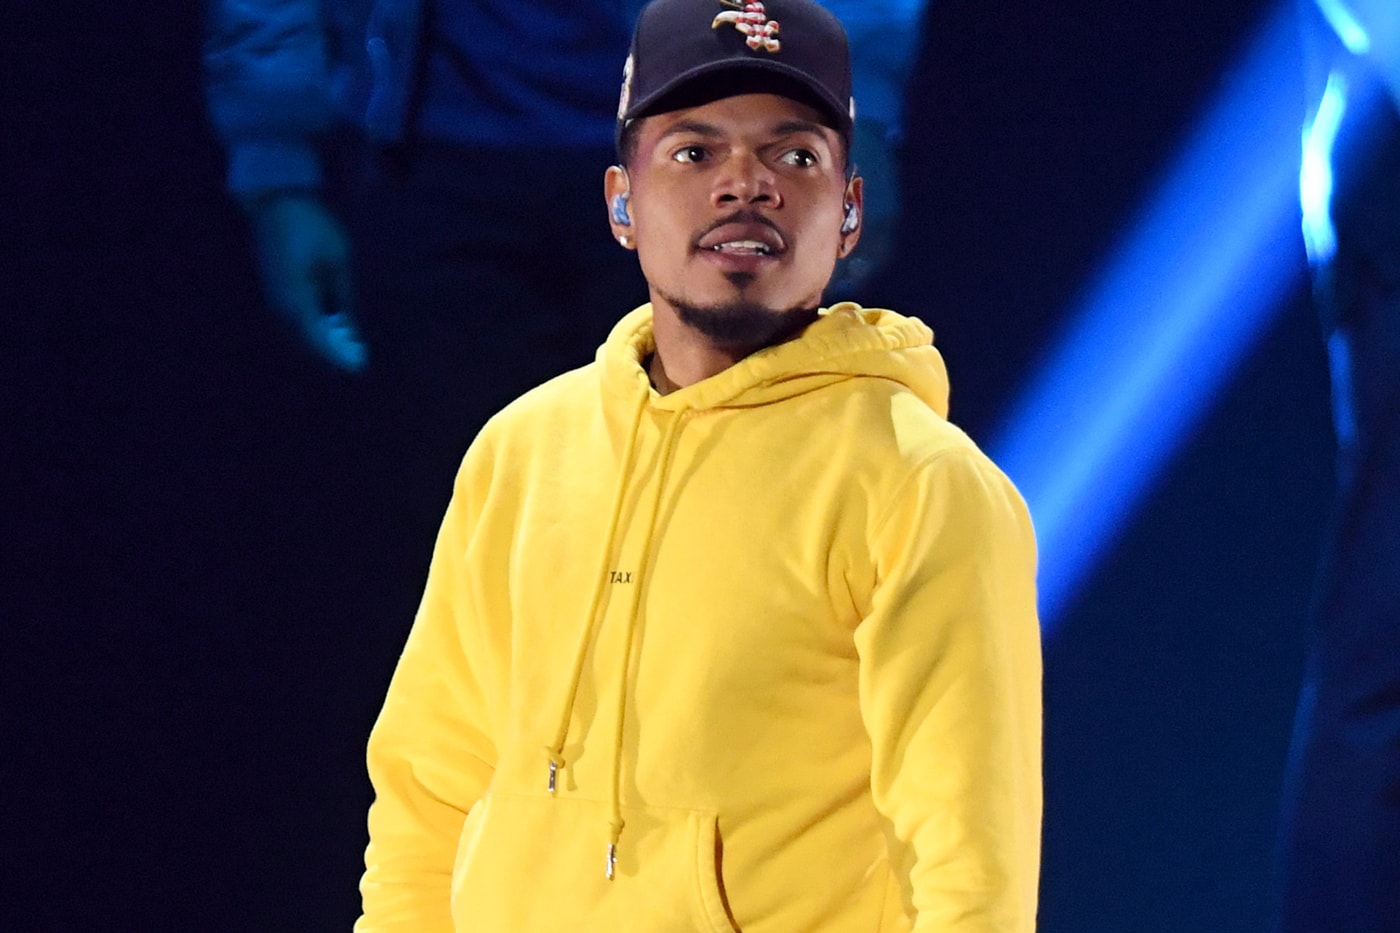 Chance The Rapper Is Getting His Own Beats 1 Show